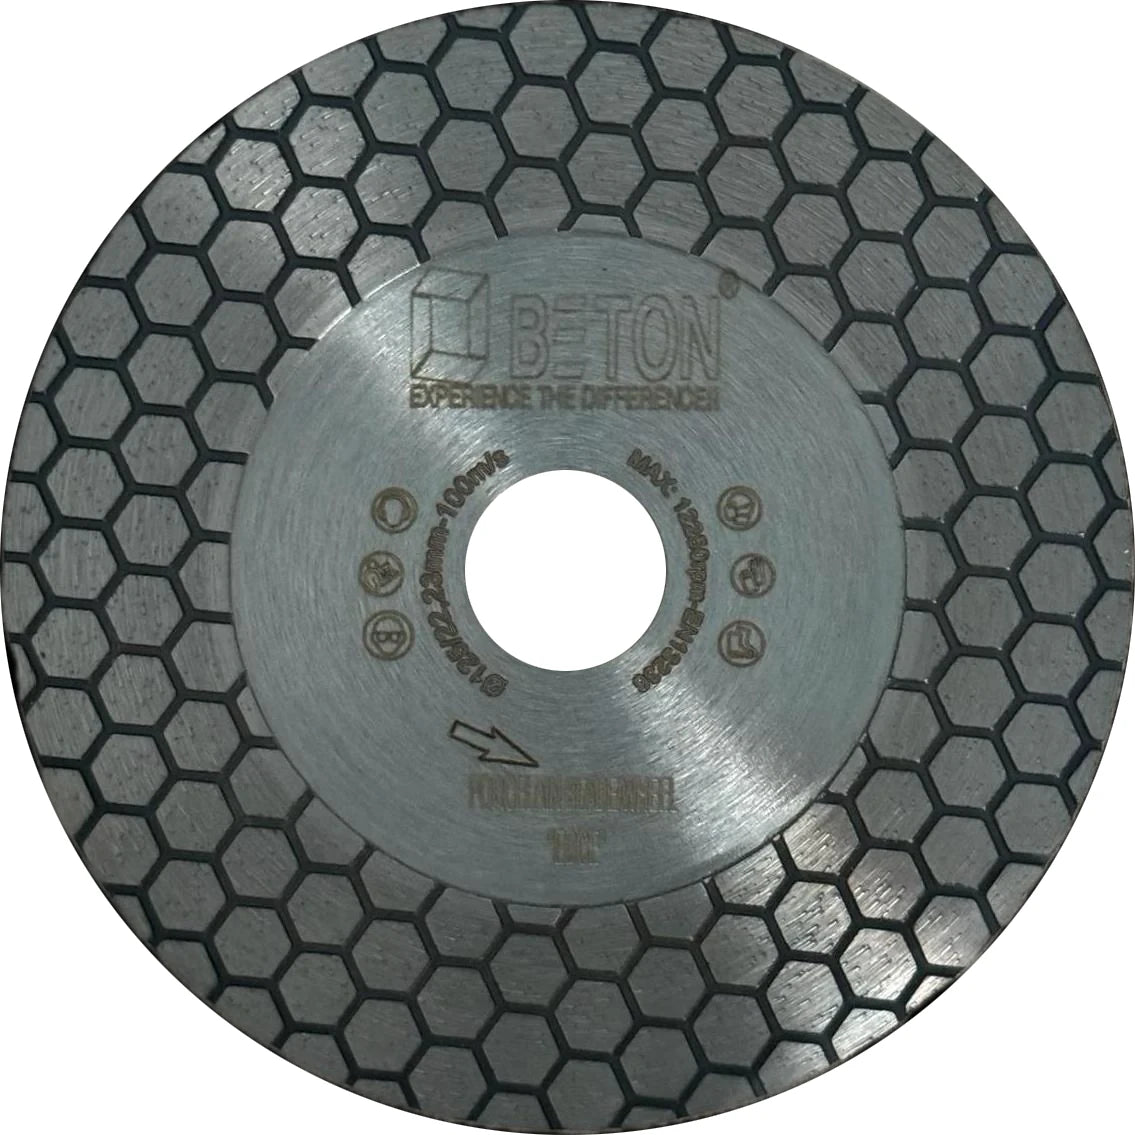 BETON  Mitre Blade for Porcelain Tile cutting 115mm and 125mm